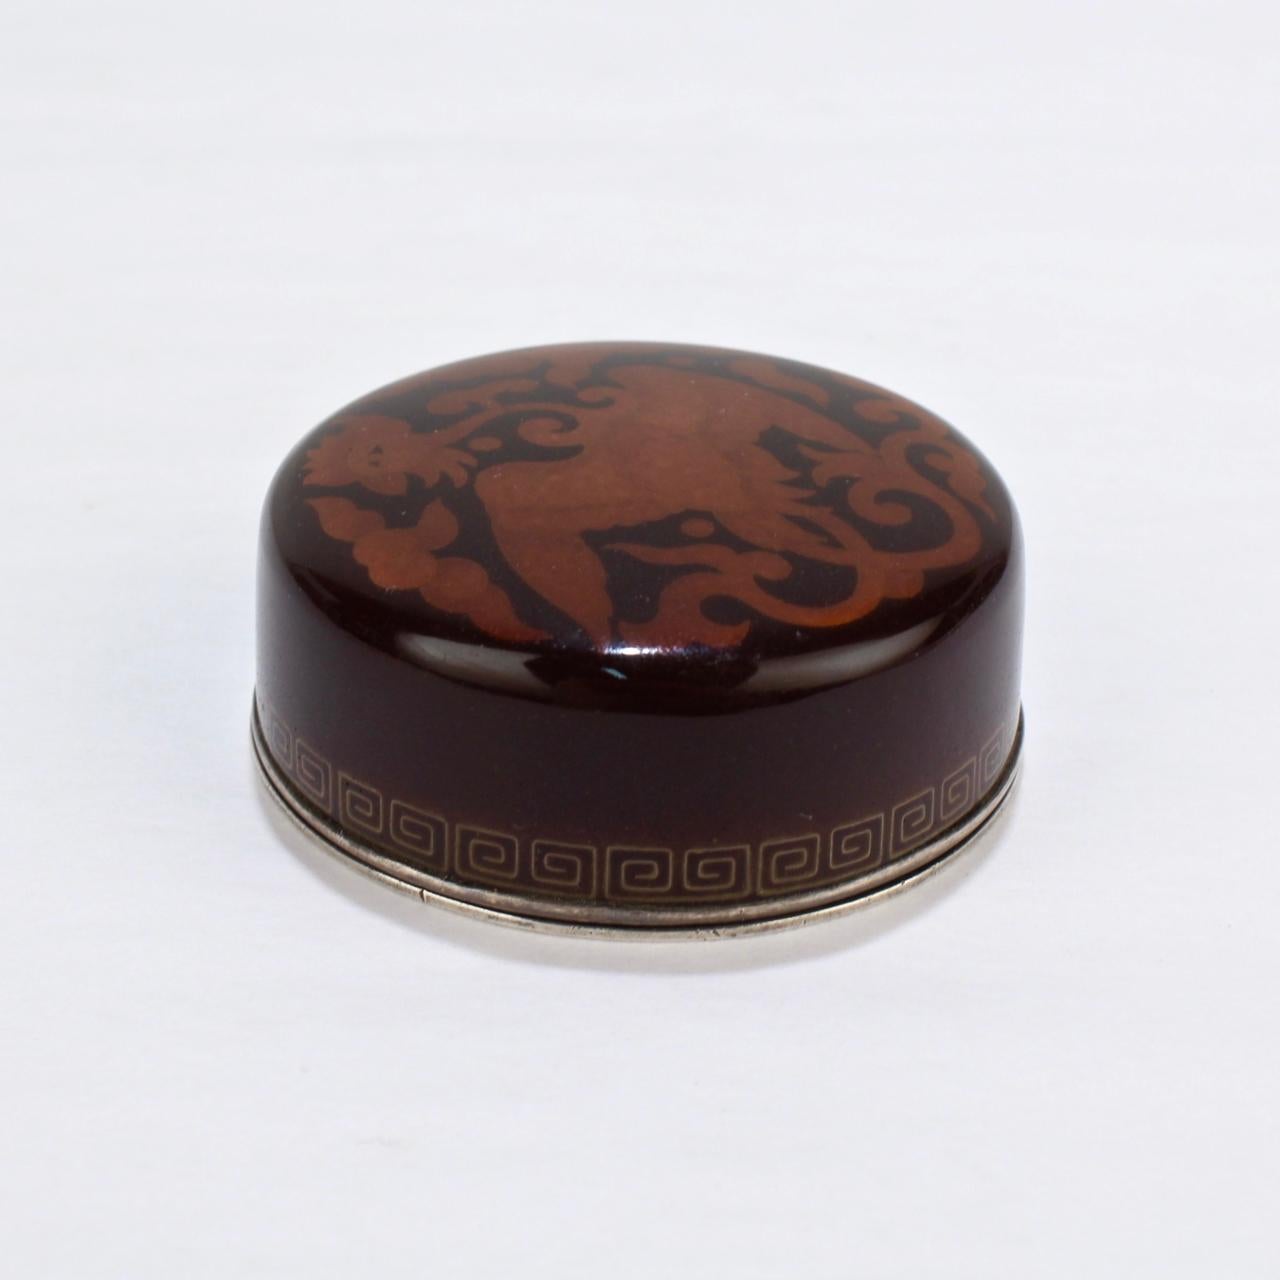 Signed Japanese Cloisonné Enamel Small Round Box with a Phoenix by Inaba 3